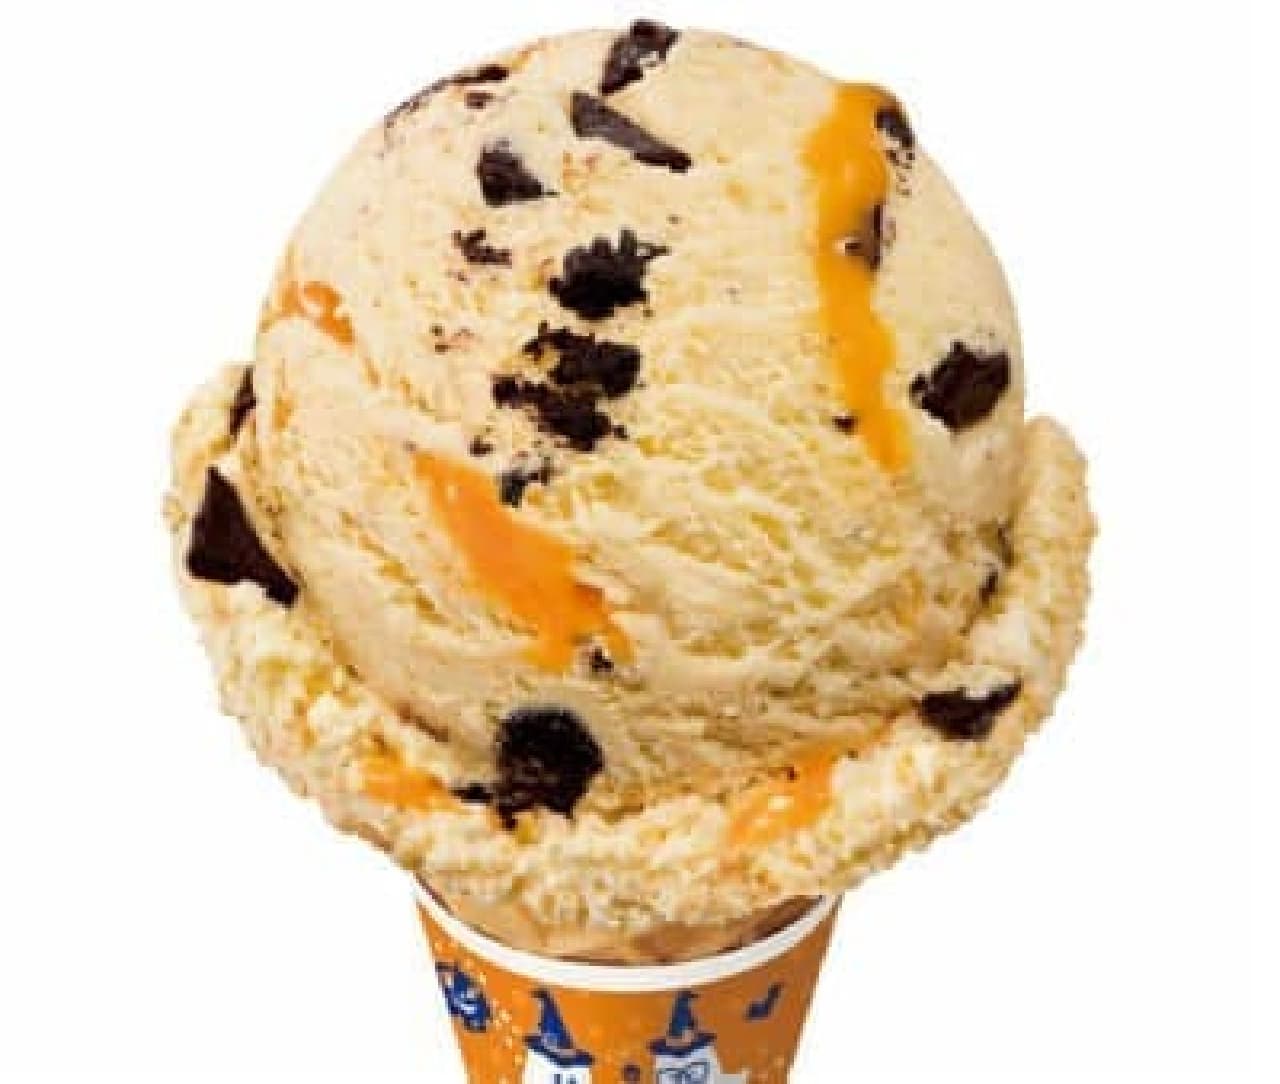 Halloween limited flavor "Trick or Ice Cream"